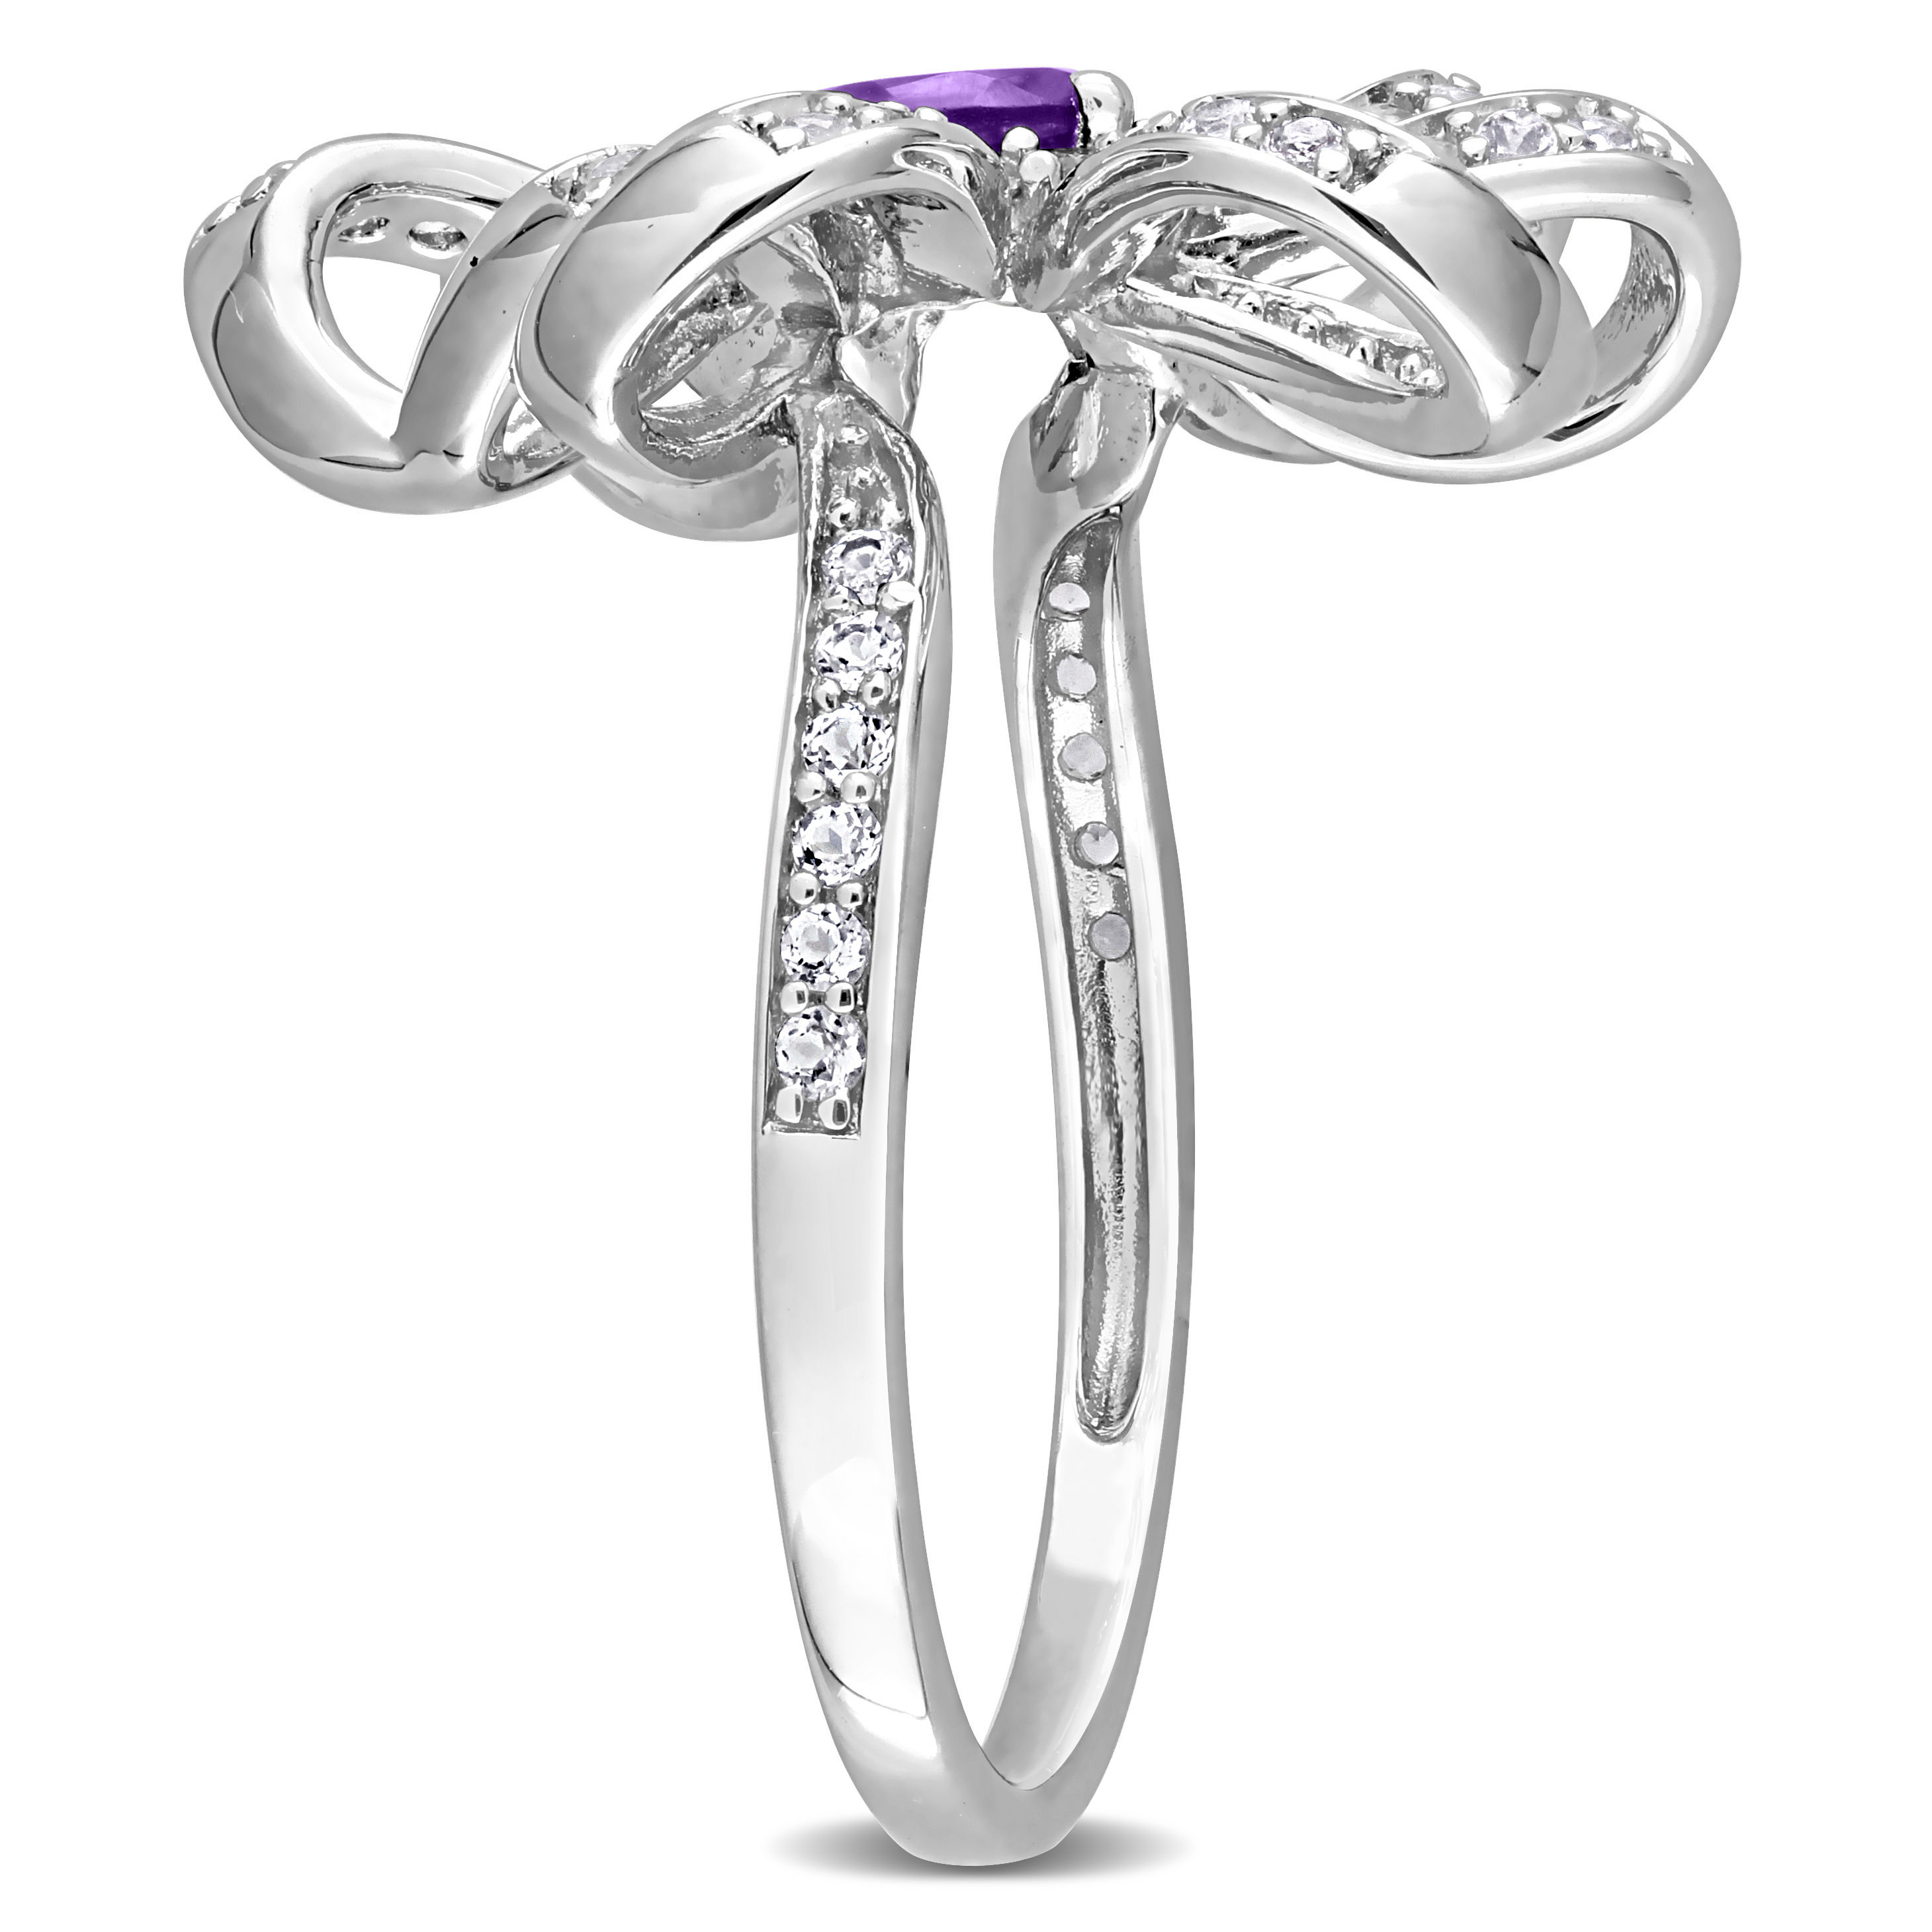 7/8 CT TGW African Amethyst and White Topaz Flower Cocktail Ring in Sterling Silver